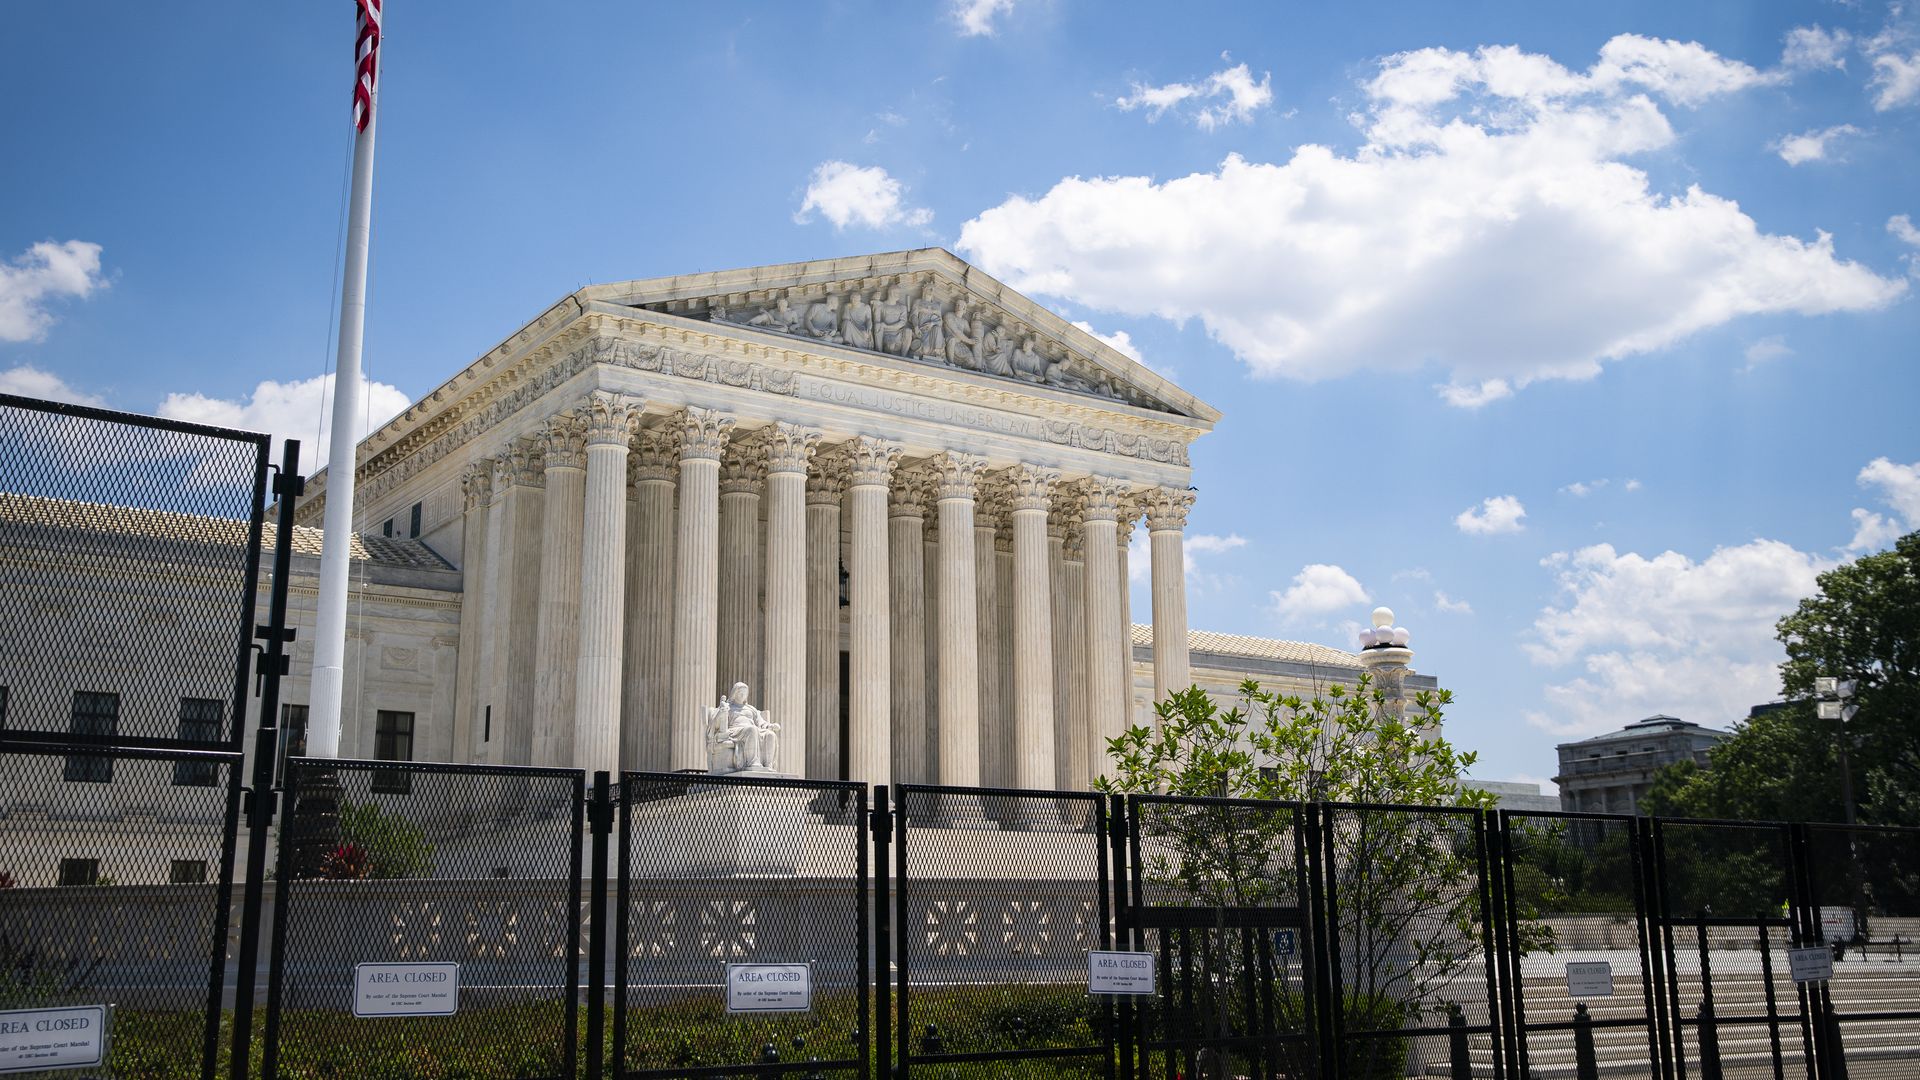 Picture of the Supreme Court building